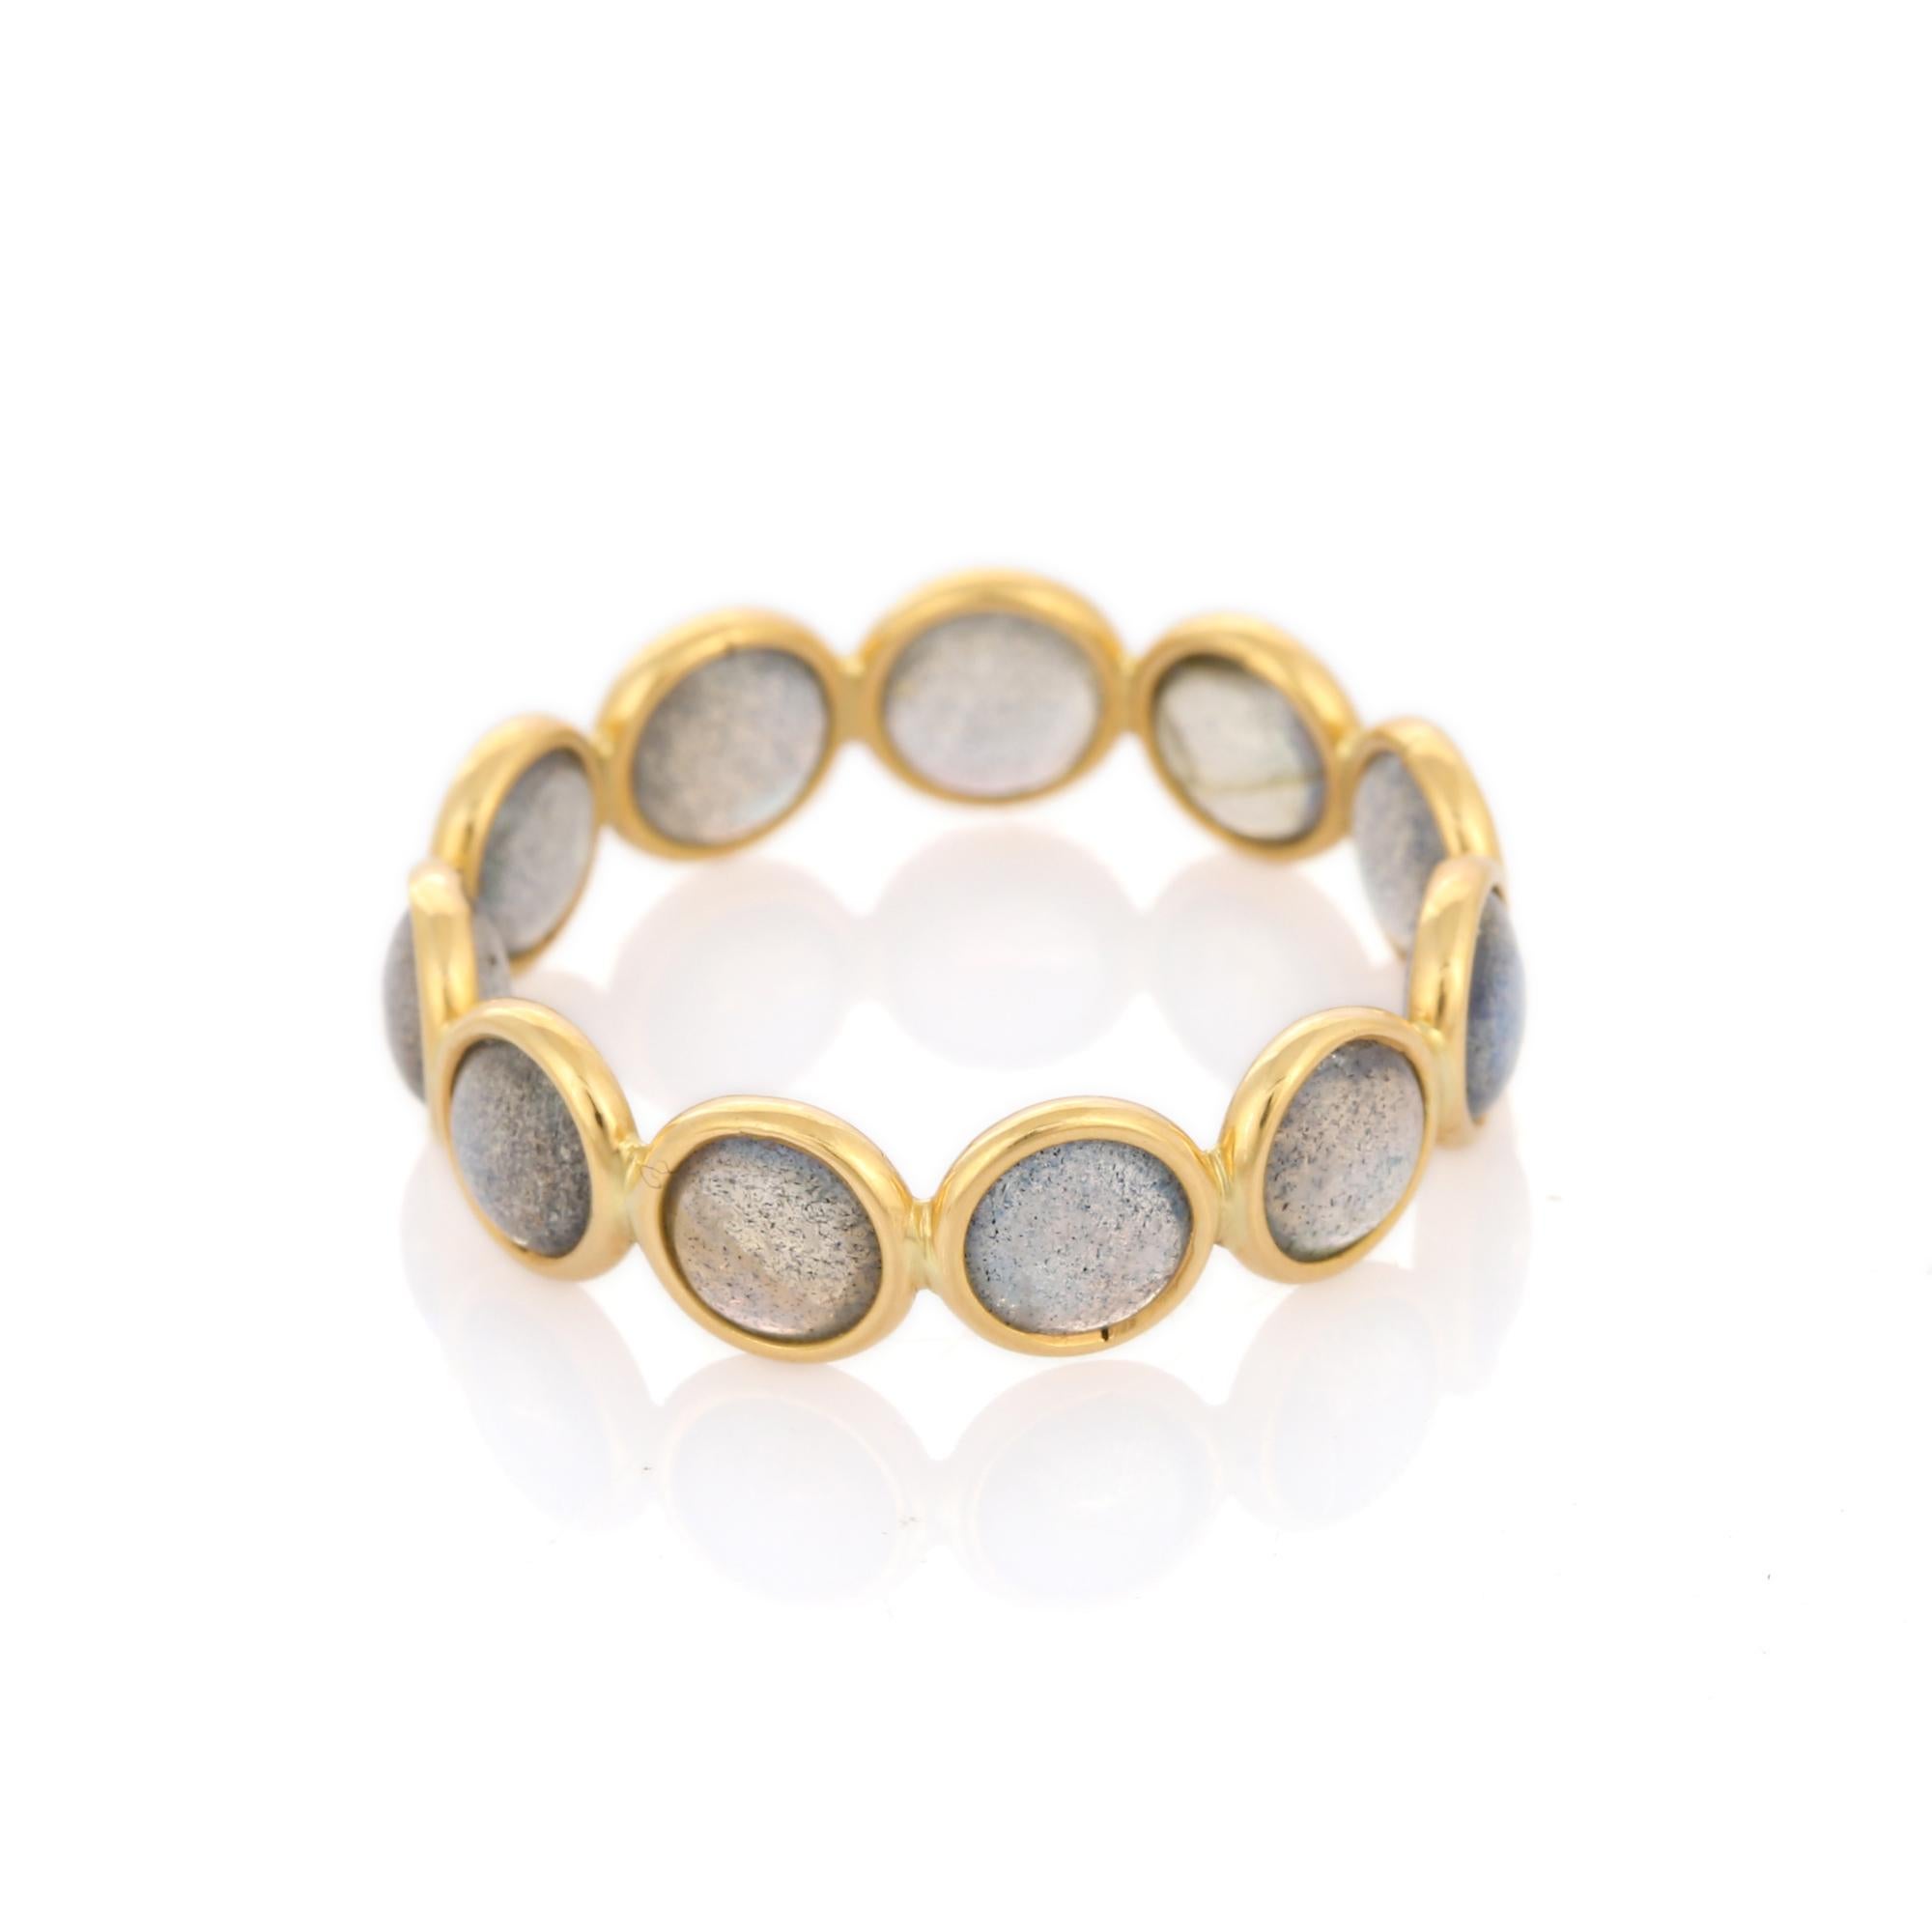 For Sale:  18k Solid Yellow Gold Labradorite Eternity Band Ring 3